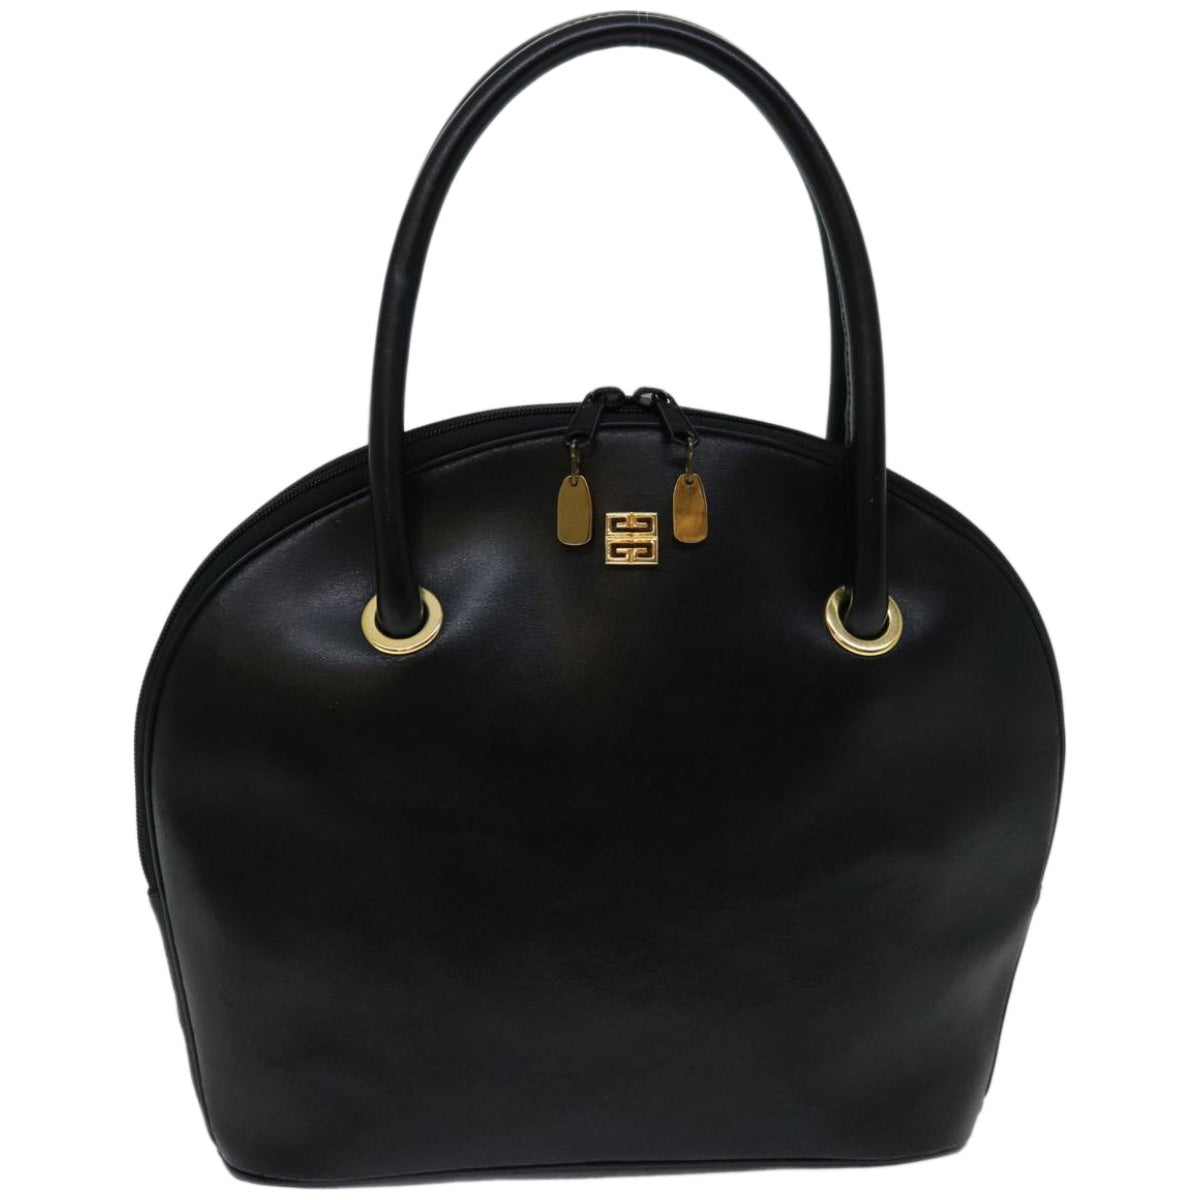 GIVENCHY Hand Bag Leather Black Auth bs12293